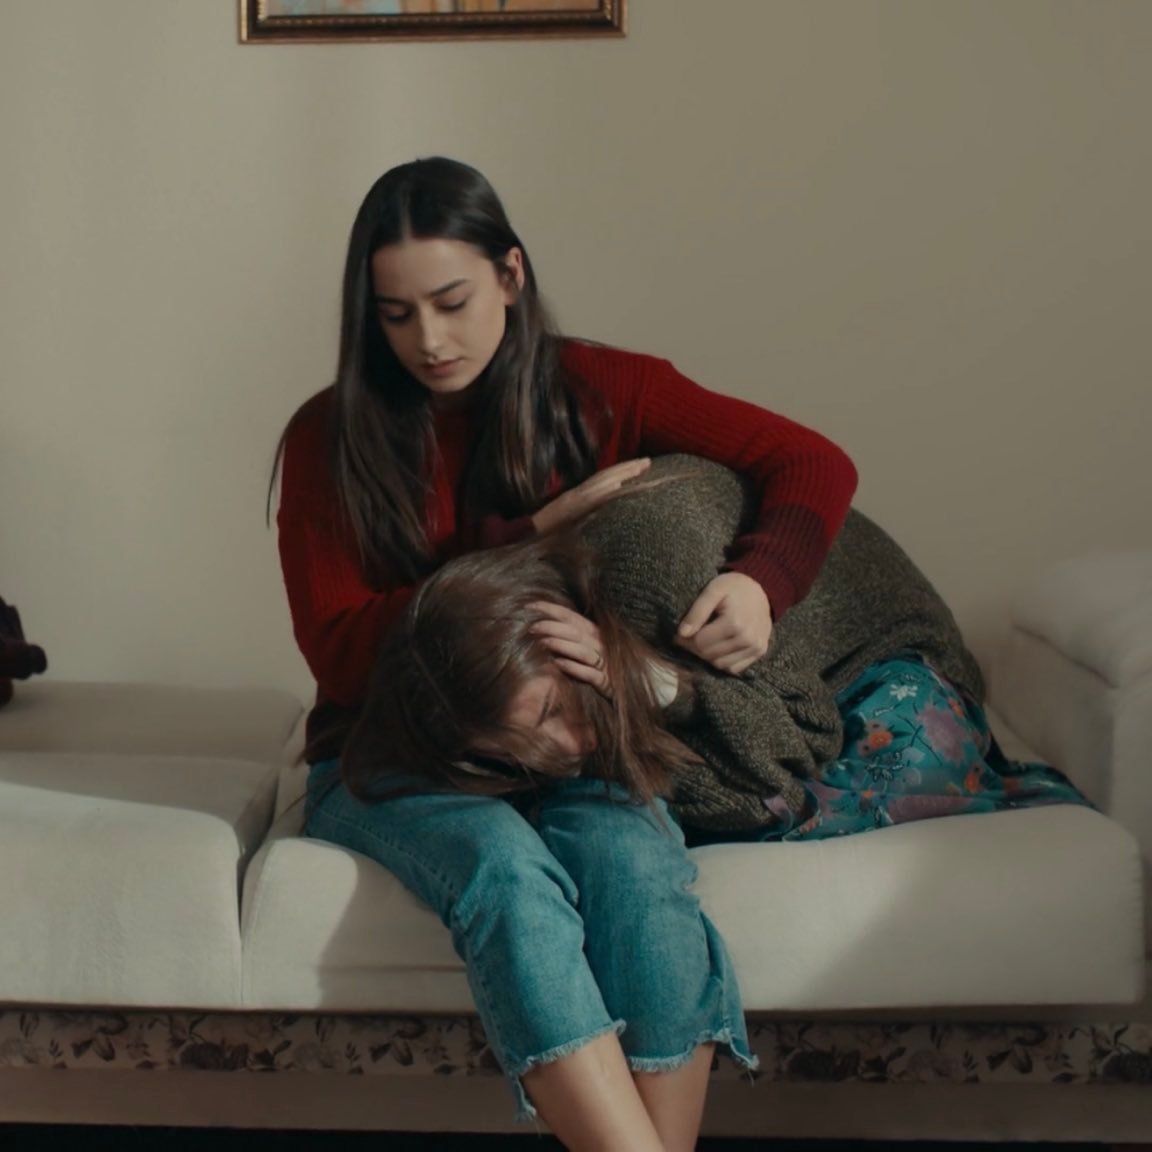 In s2 Karaca became calmer, caring, compassionate compassion became a key trait in her character. She understood that love can't happen by force , that her actions have consequences she must take responsability for  #cukur  #KaracaKoçovalı  #AzKar